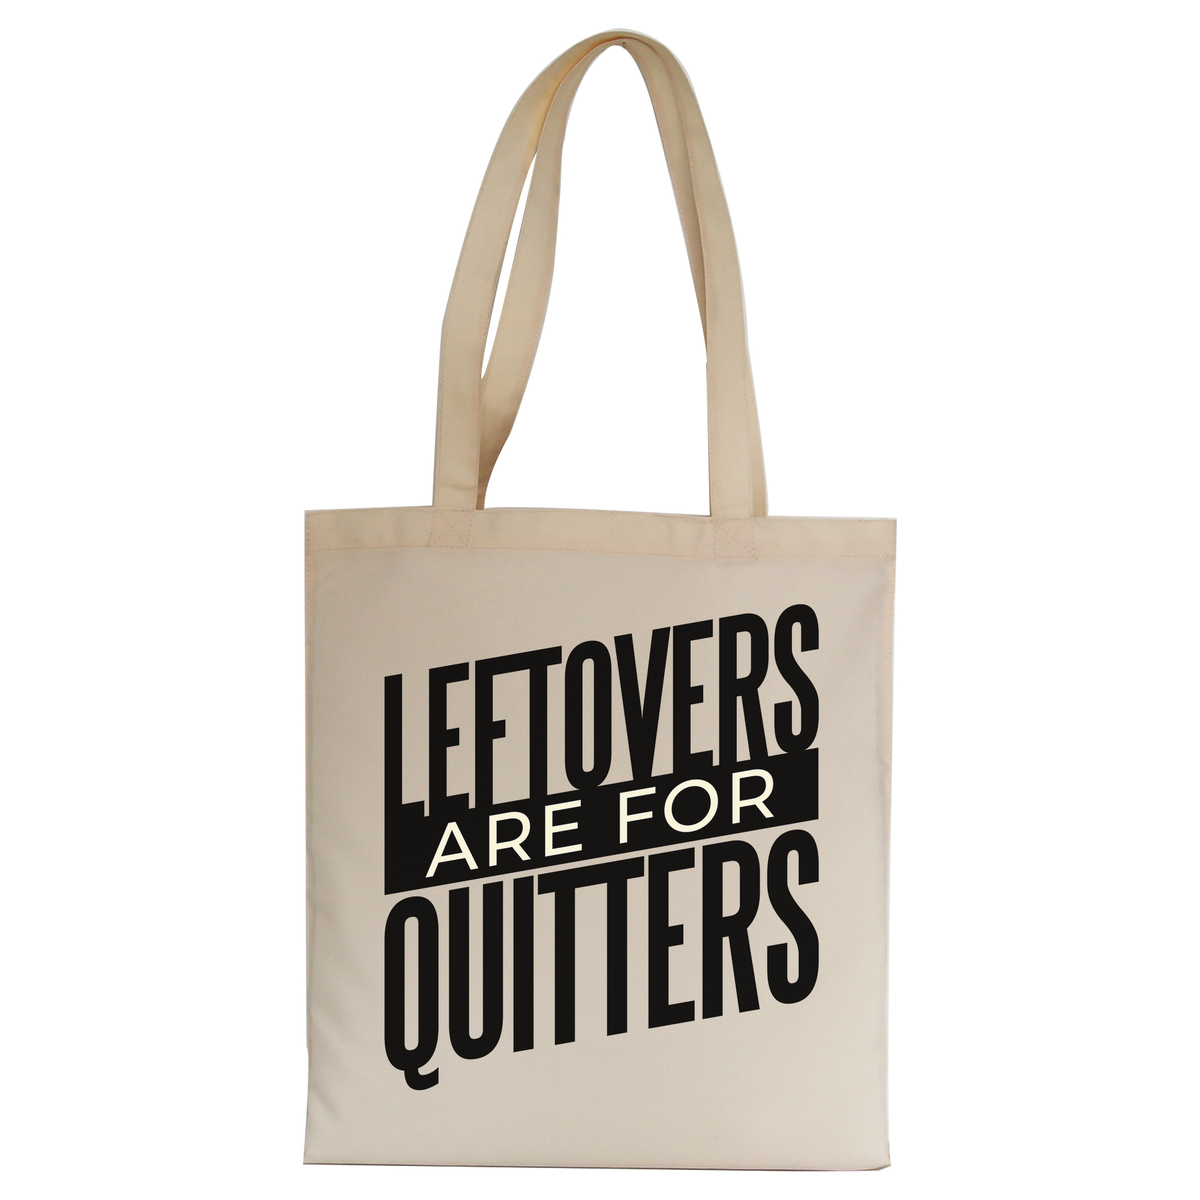 Leftovers quote funny food tote bag canvas shopping– Graphic Gear